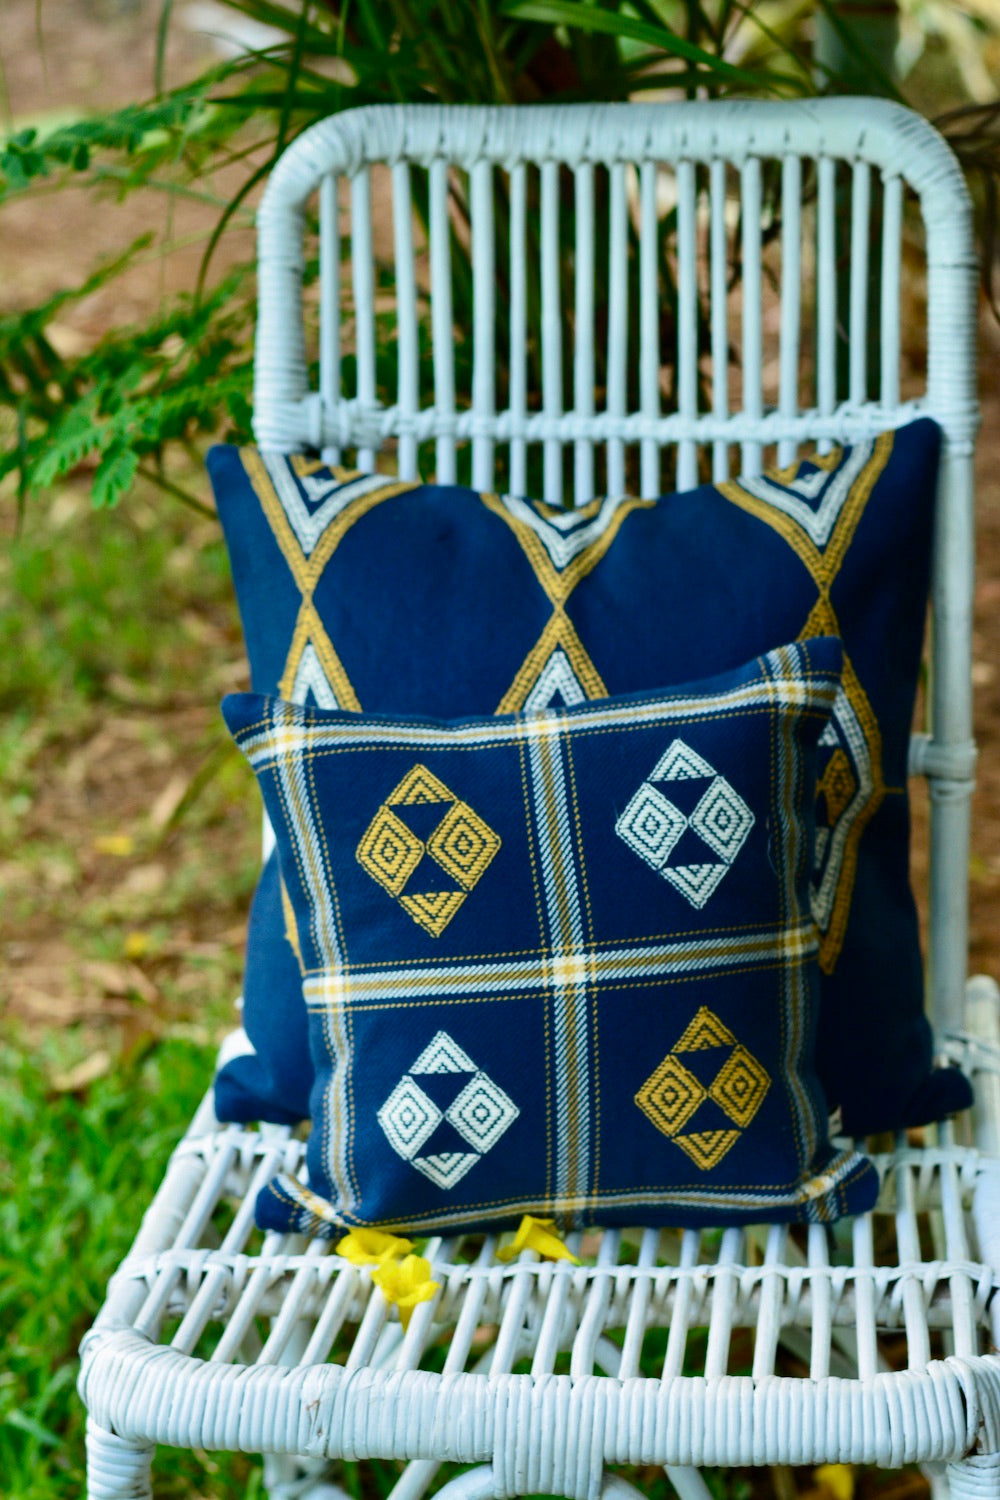 Suti Extra Weft Woven 12X12 Cushion Cover in Navy